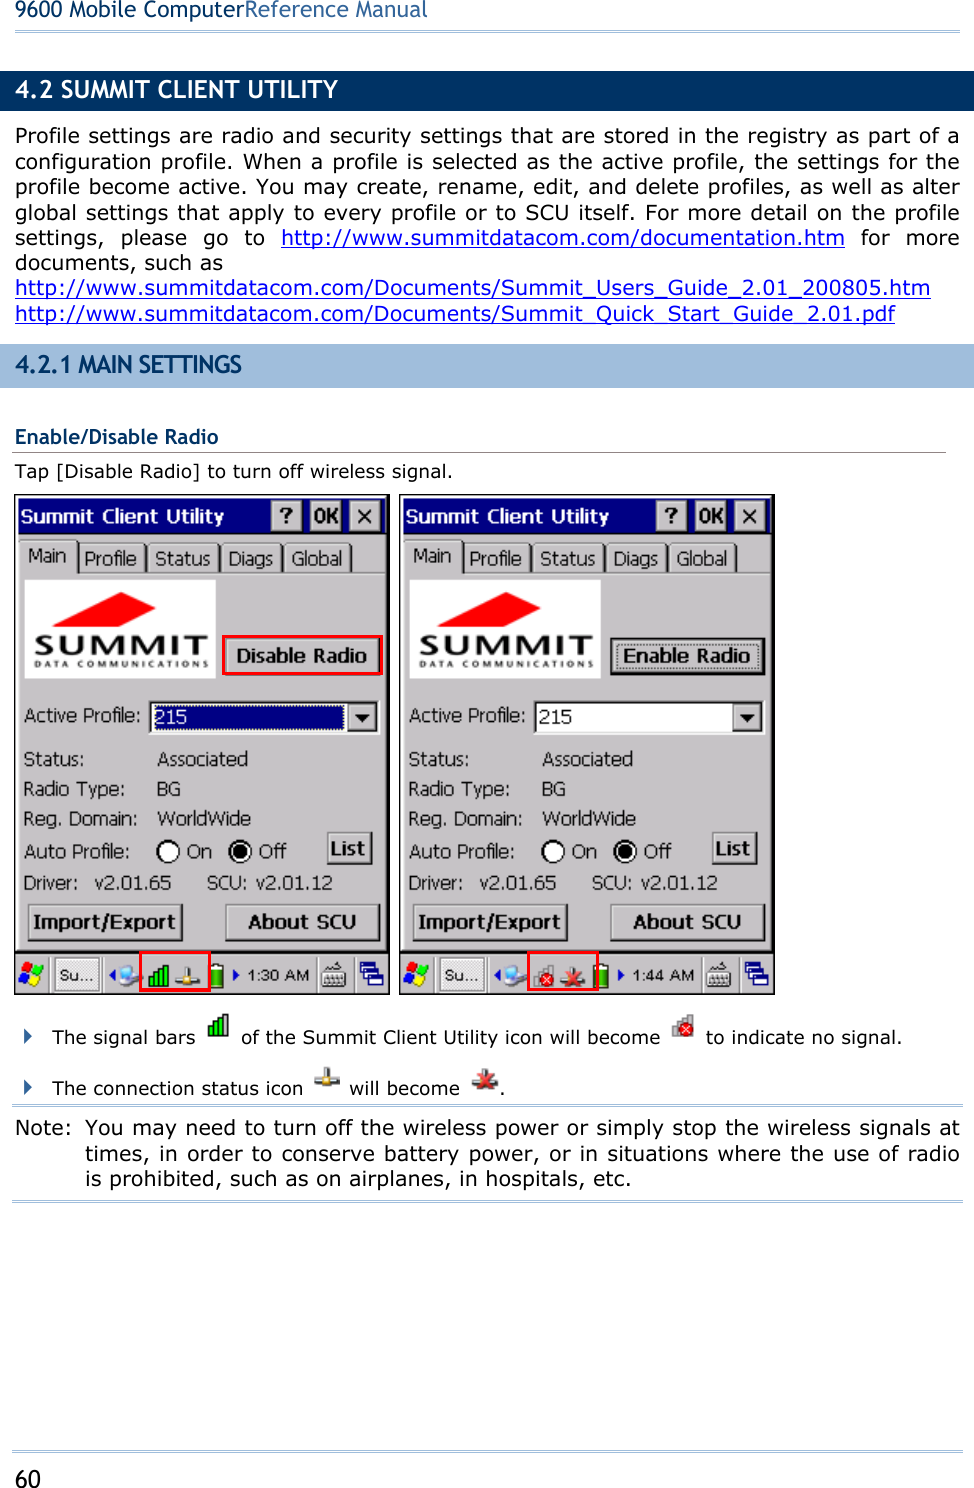 60  9600 Mobile ComputerReference Manual 4.2 SUMMIT CLIENT UTILITY Profile settings are radio and security settings that are stored in the registry as part of a configuration profile. When a profile is selected as the active profile, the settings for the profile become active. You may create, rename, edit, and delete profiles, as well as alter global settings that apply to every profile or to SCU itself. For more detail on the profile settings, please go to http://www.summitdatacom.com/documentation.htm for more documents, such as http://www.summitdatacom.com/Documents/Summit_Users_Guide_2.01_200805.htm http://www.summitdatacom.com/Documents/Summit_Quick_Start_Guide_2.01.pdf 4.2.1 MAIN SETTINGS Enable/Disable Radio Tap [Disable Radio] to turn off wireless signal.     The signal bars    of the Summit Client Utility icon will become    to indicate no signal.  The connection status icon   will become  . Note:  You may need to turn off the wireless power or simply stop the wireless signals at times, in order to conserve battery power, or in situations where the use of radio is prohibited, such as on airplanes, in hospitals, etc.  